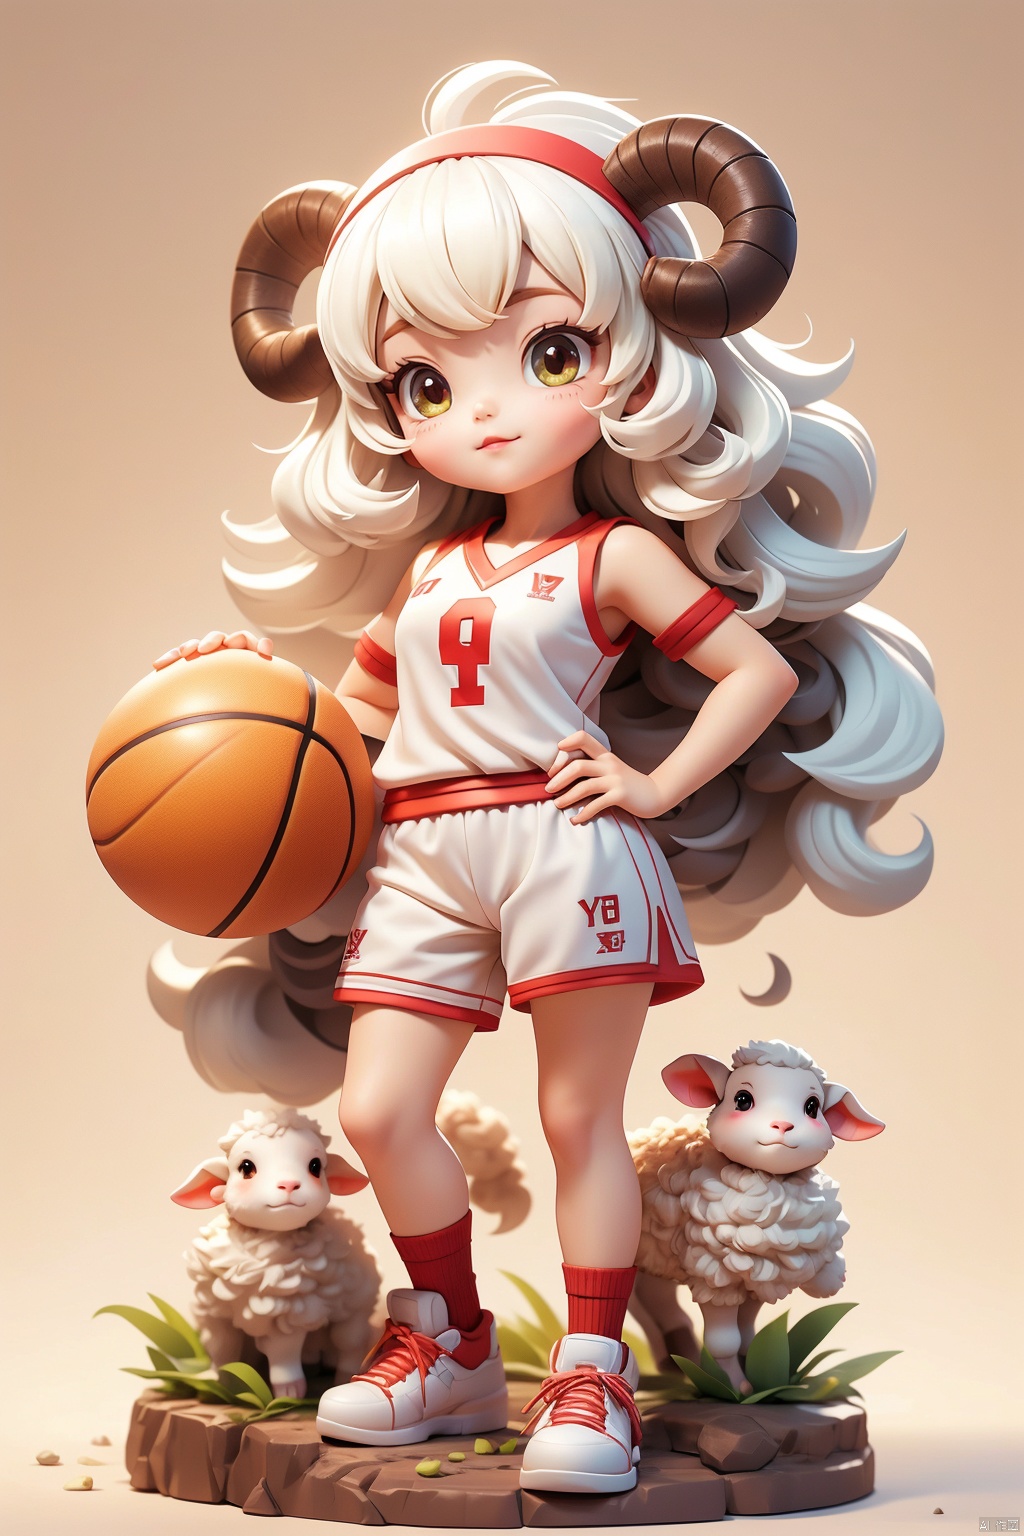 1 girl, solo, white hair, sheep hair, (3 years :1.9), (Q version :1.6), IP, determined expression, sheep horns, animal features, basketball uniform, blush, simple white background, hands on hips